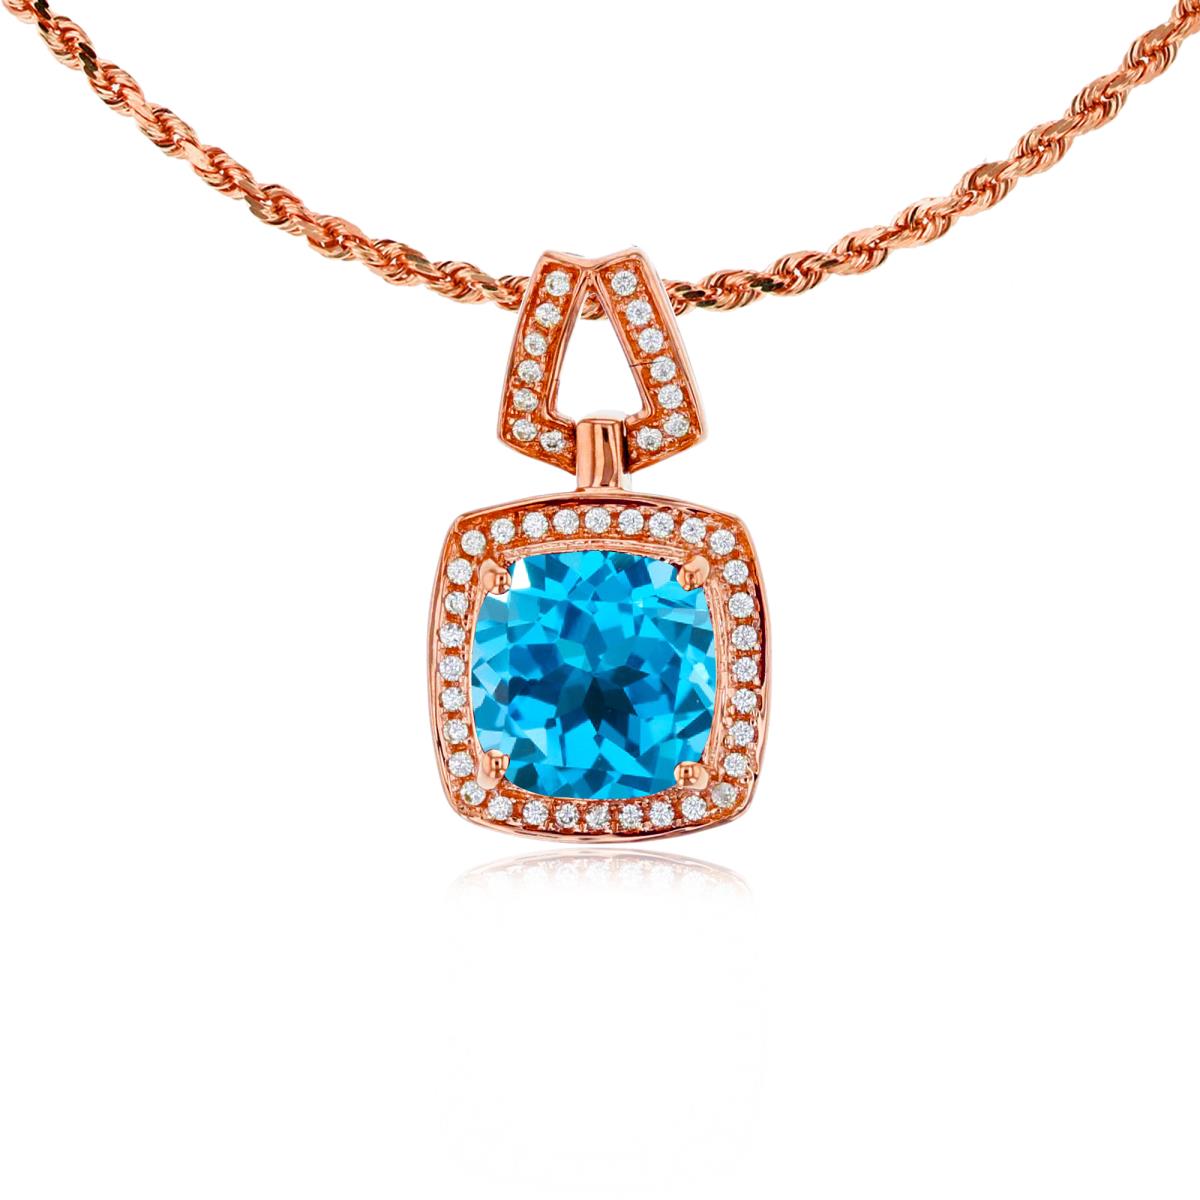 10K Rose Gold 7mm Cushion Swiss Blue Topaz & 0.10 CTTW Diamond Halo 18" Rope Chain Necklace